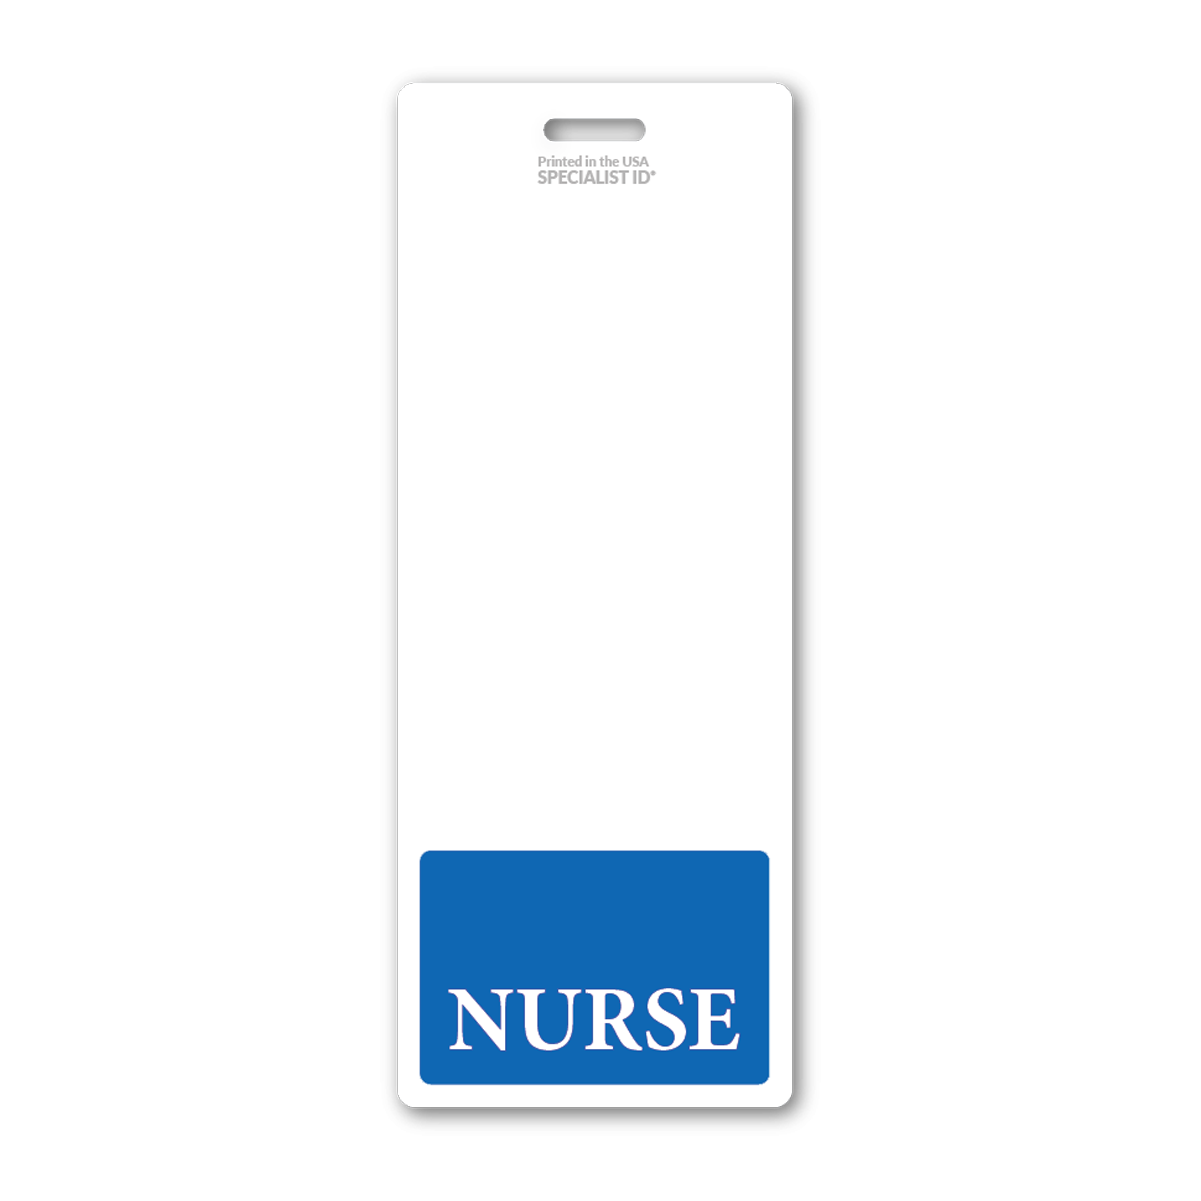 oversized Nurse badge buddy vertical - extra long ID badge buddy for nurses with a blue border - double sided